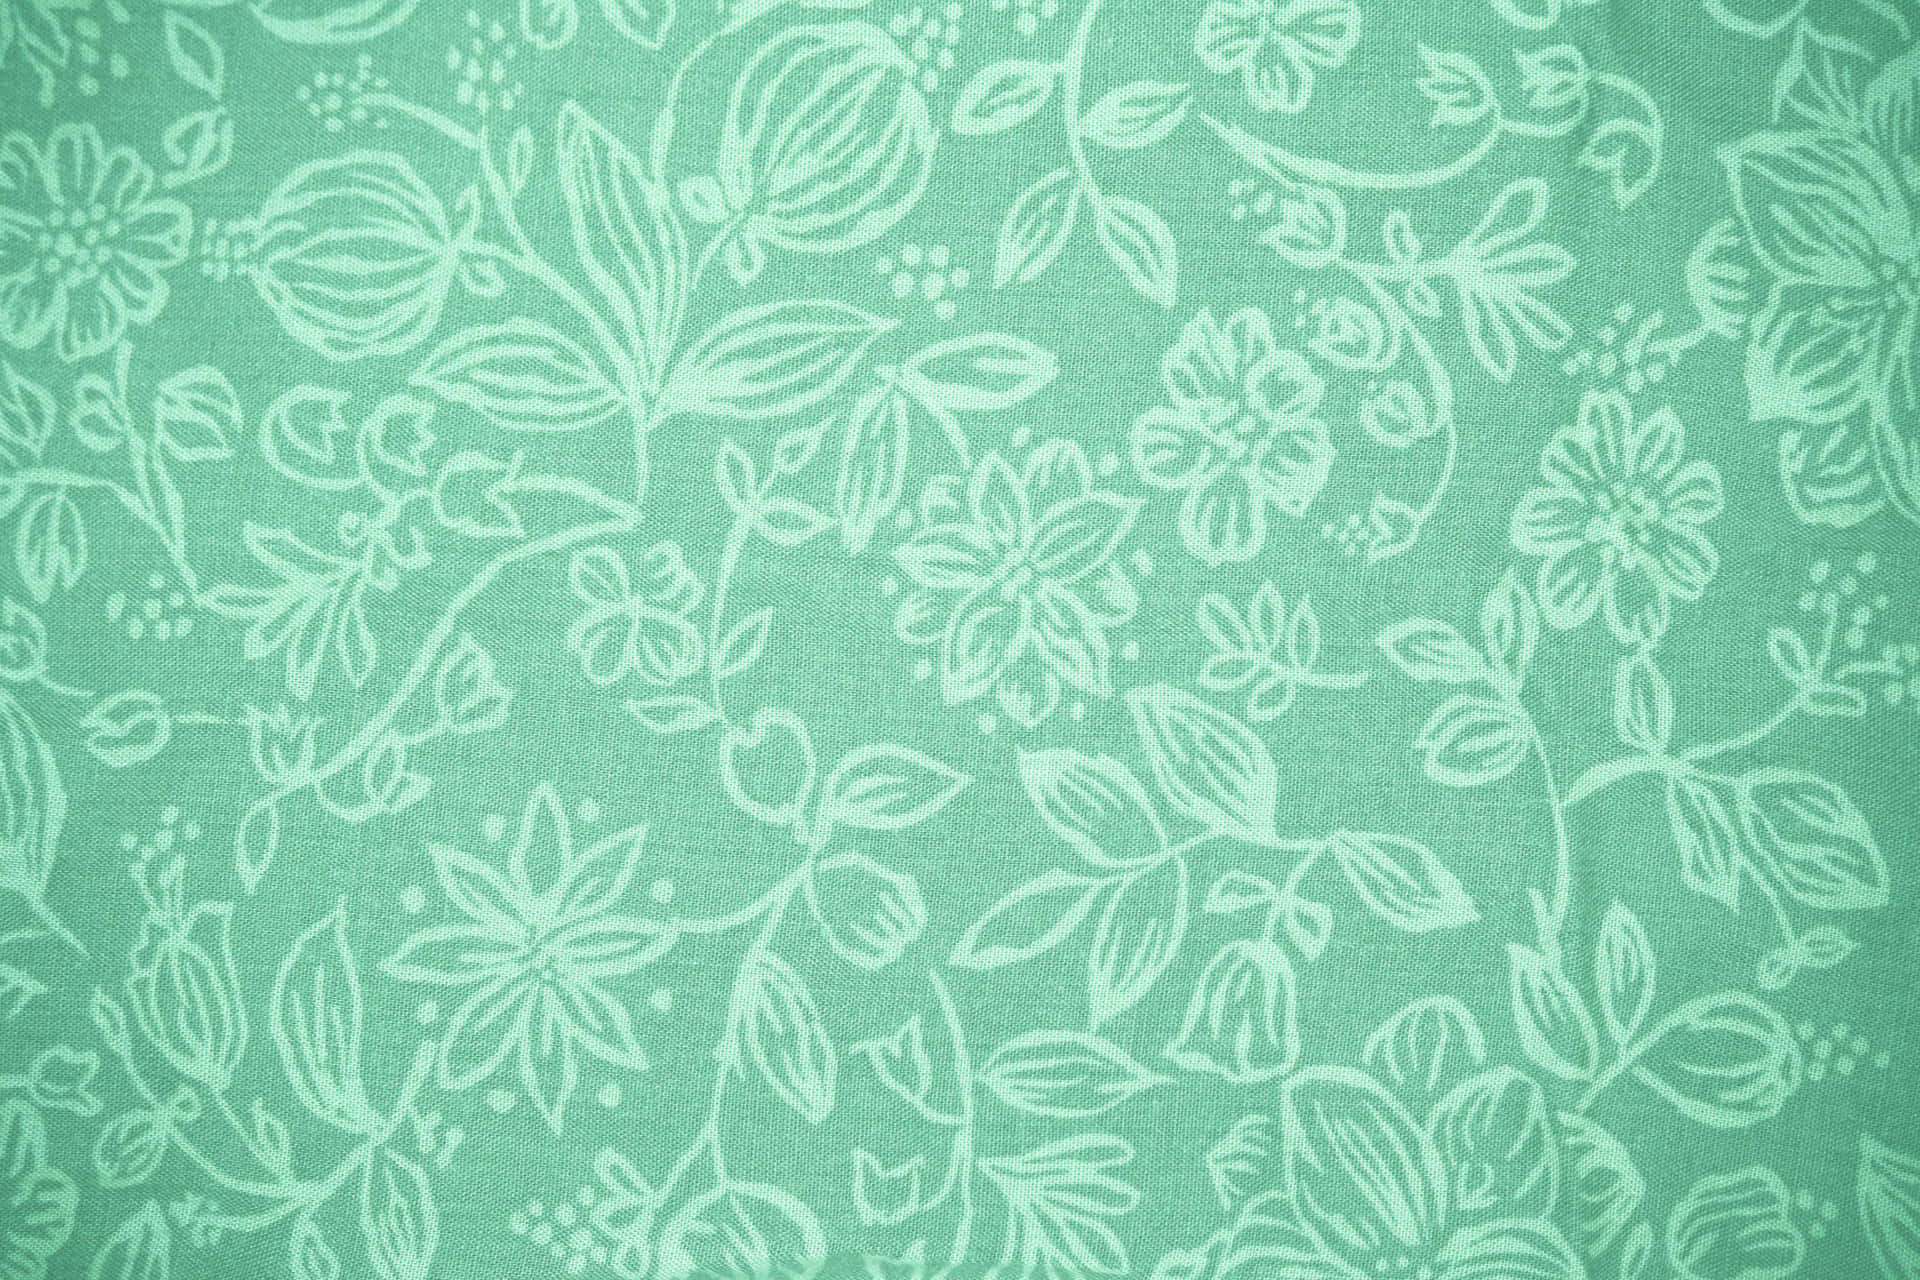 A Green Floral Pattern On A Fabric